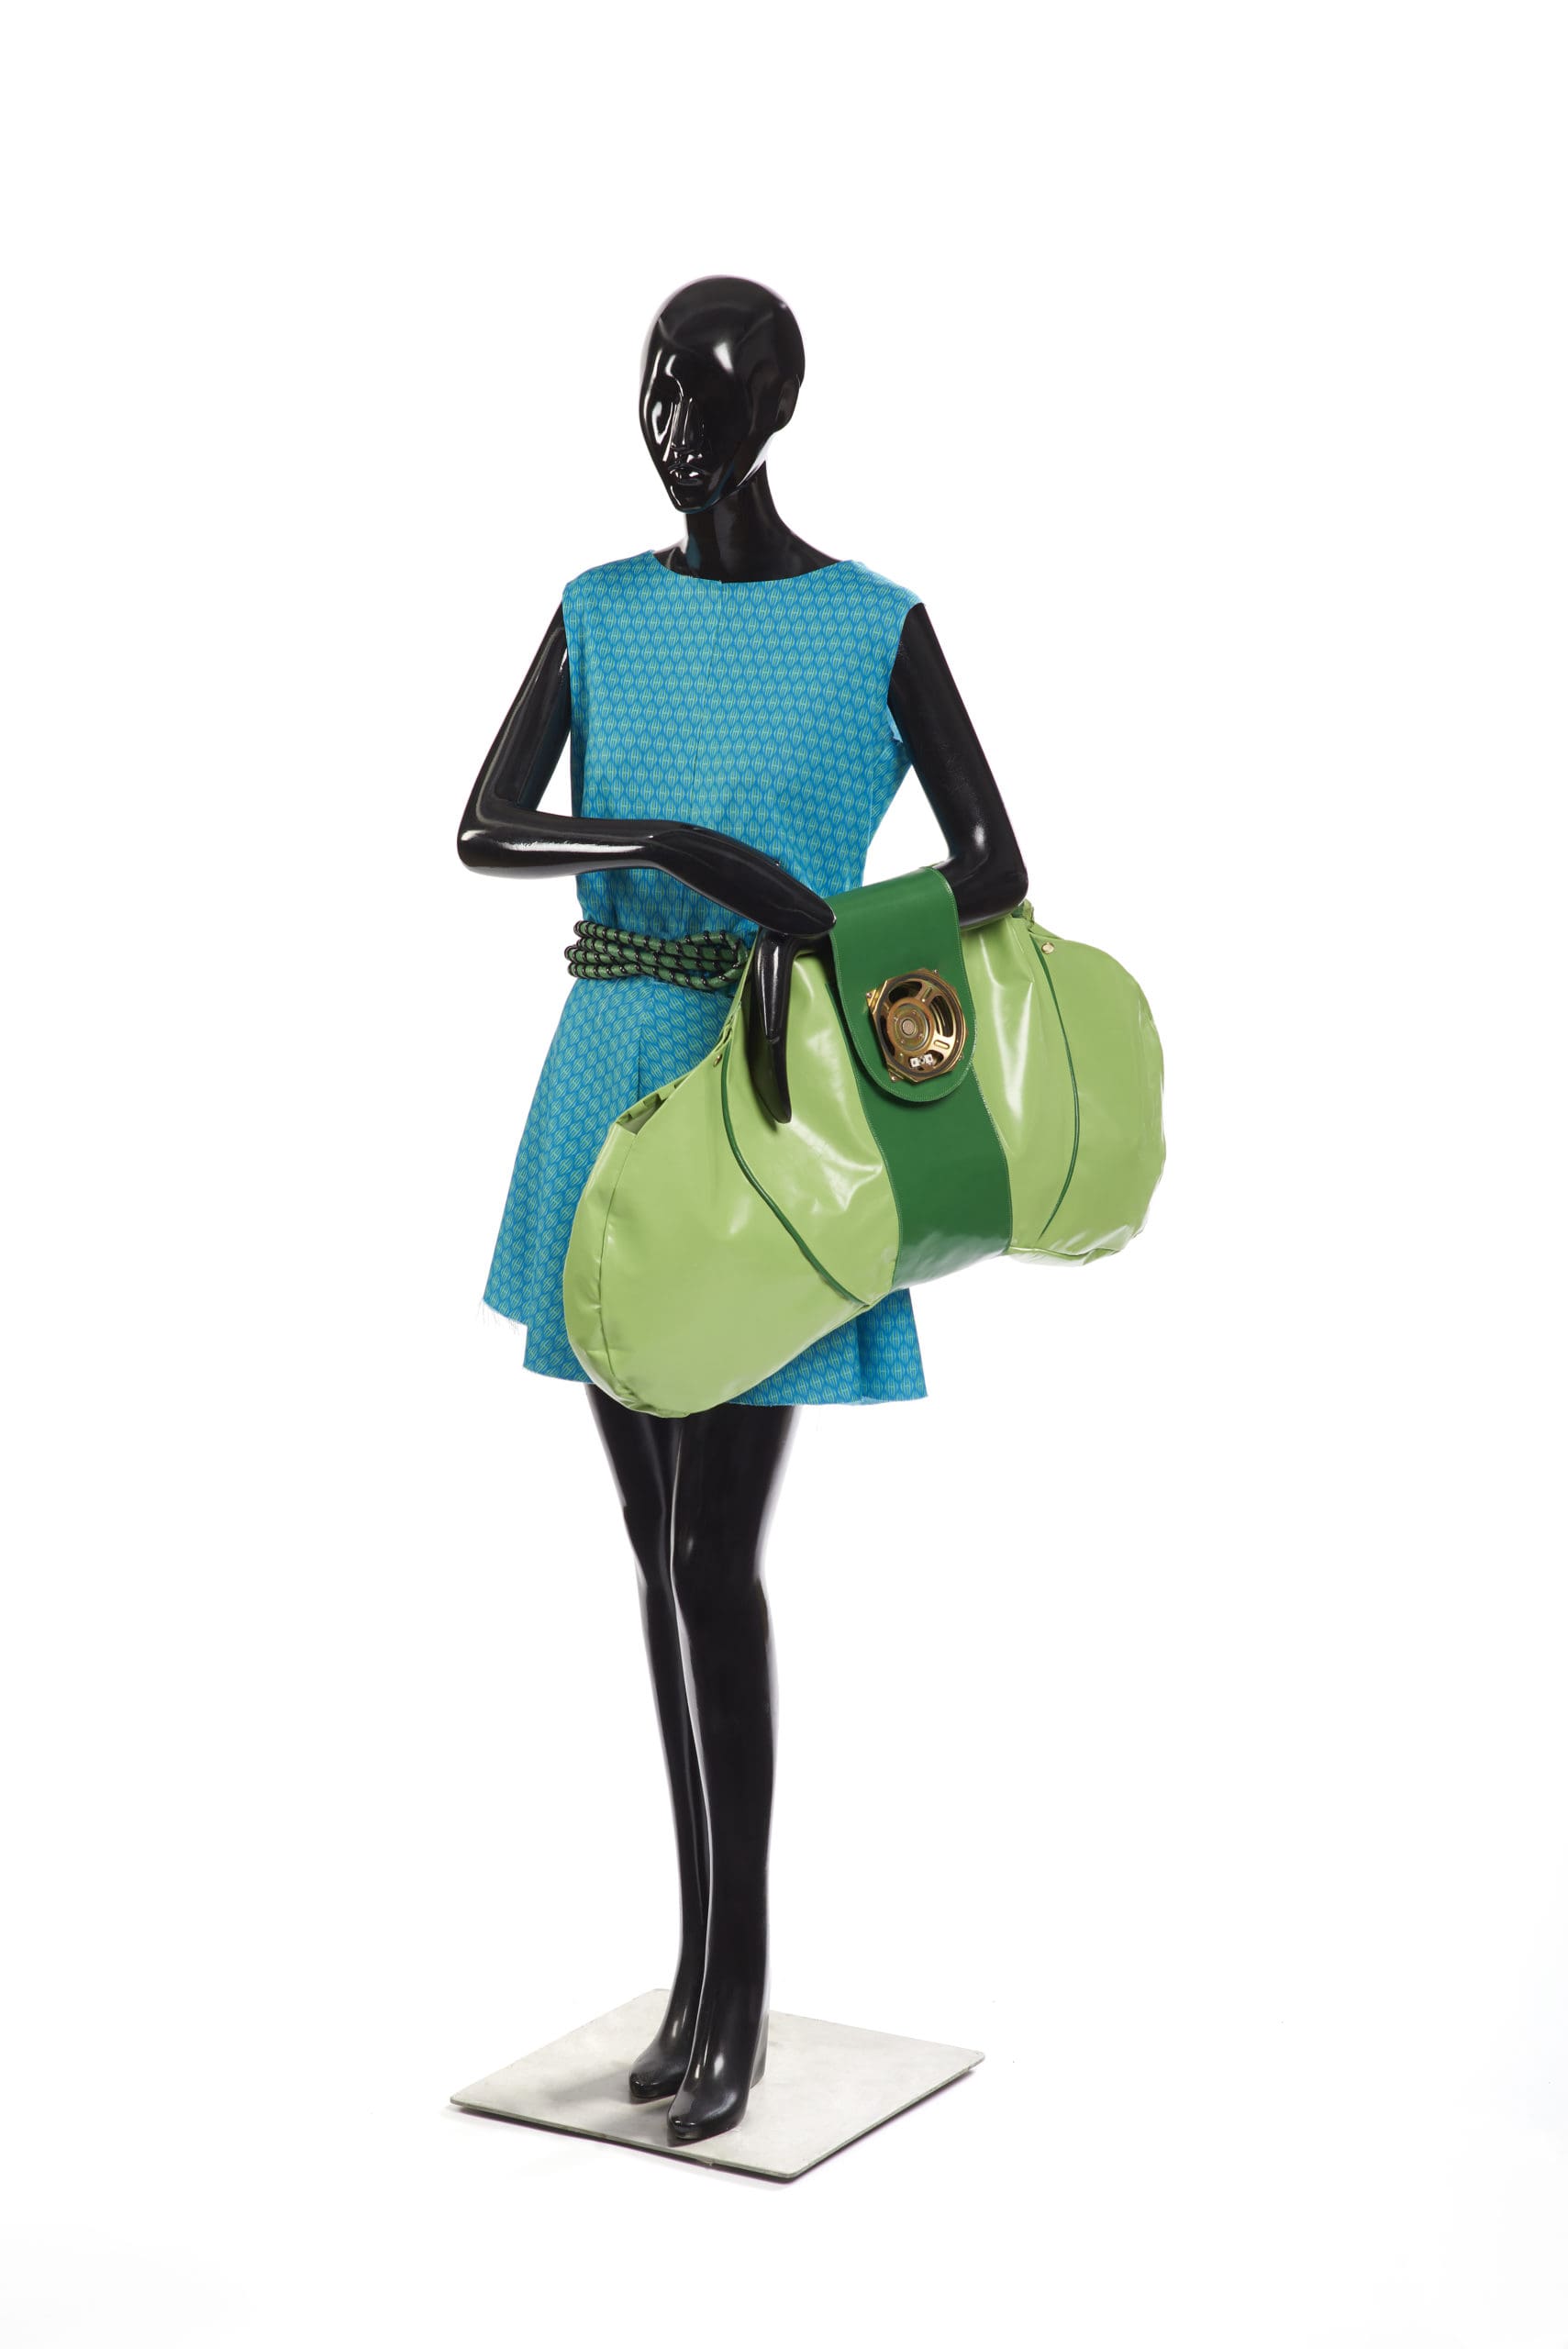 Black mannequin wearing a bright blue polka dot mini dress with a green rope belt. Also holding a large faux plastic light green bag with a wide dark green strap and a large gold button clasp